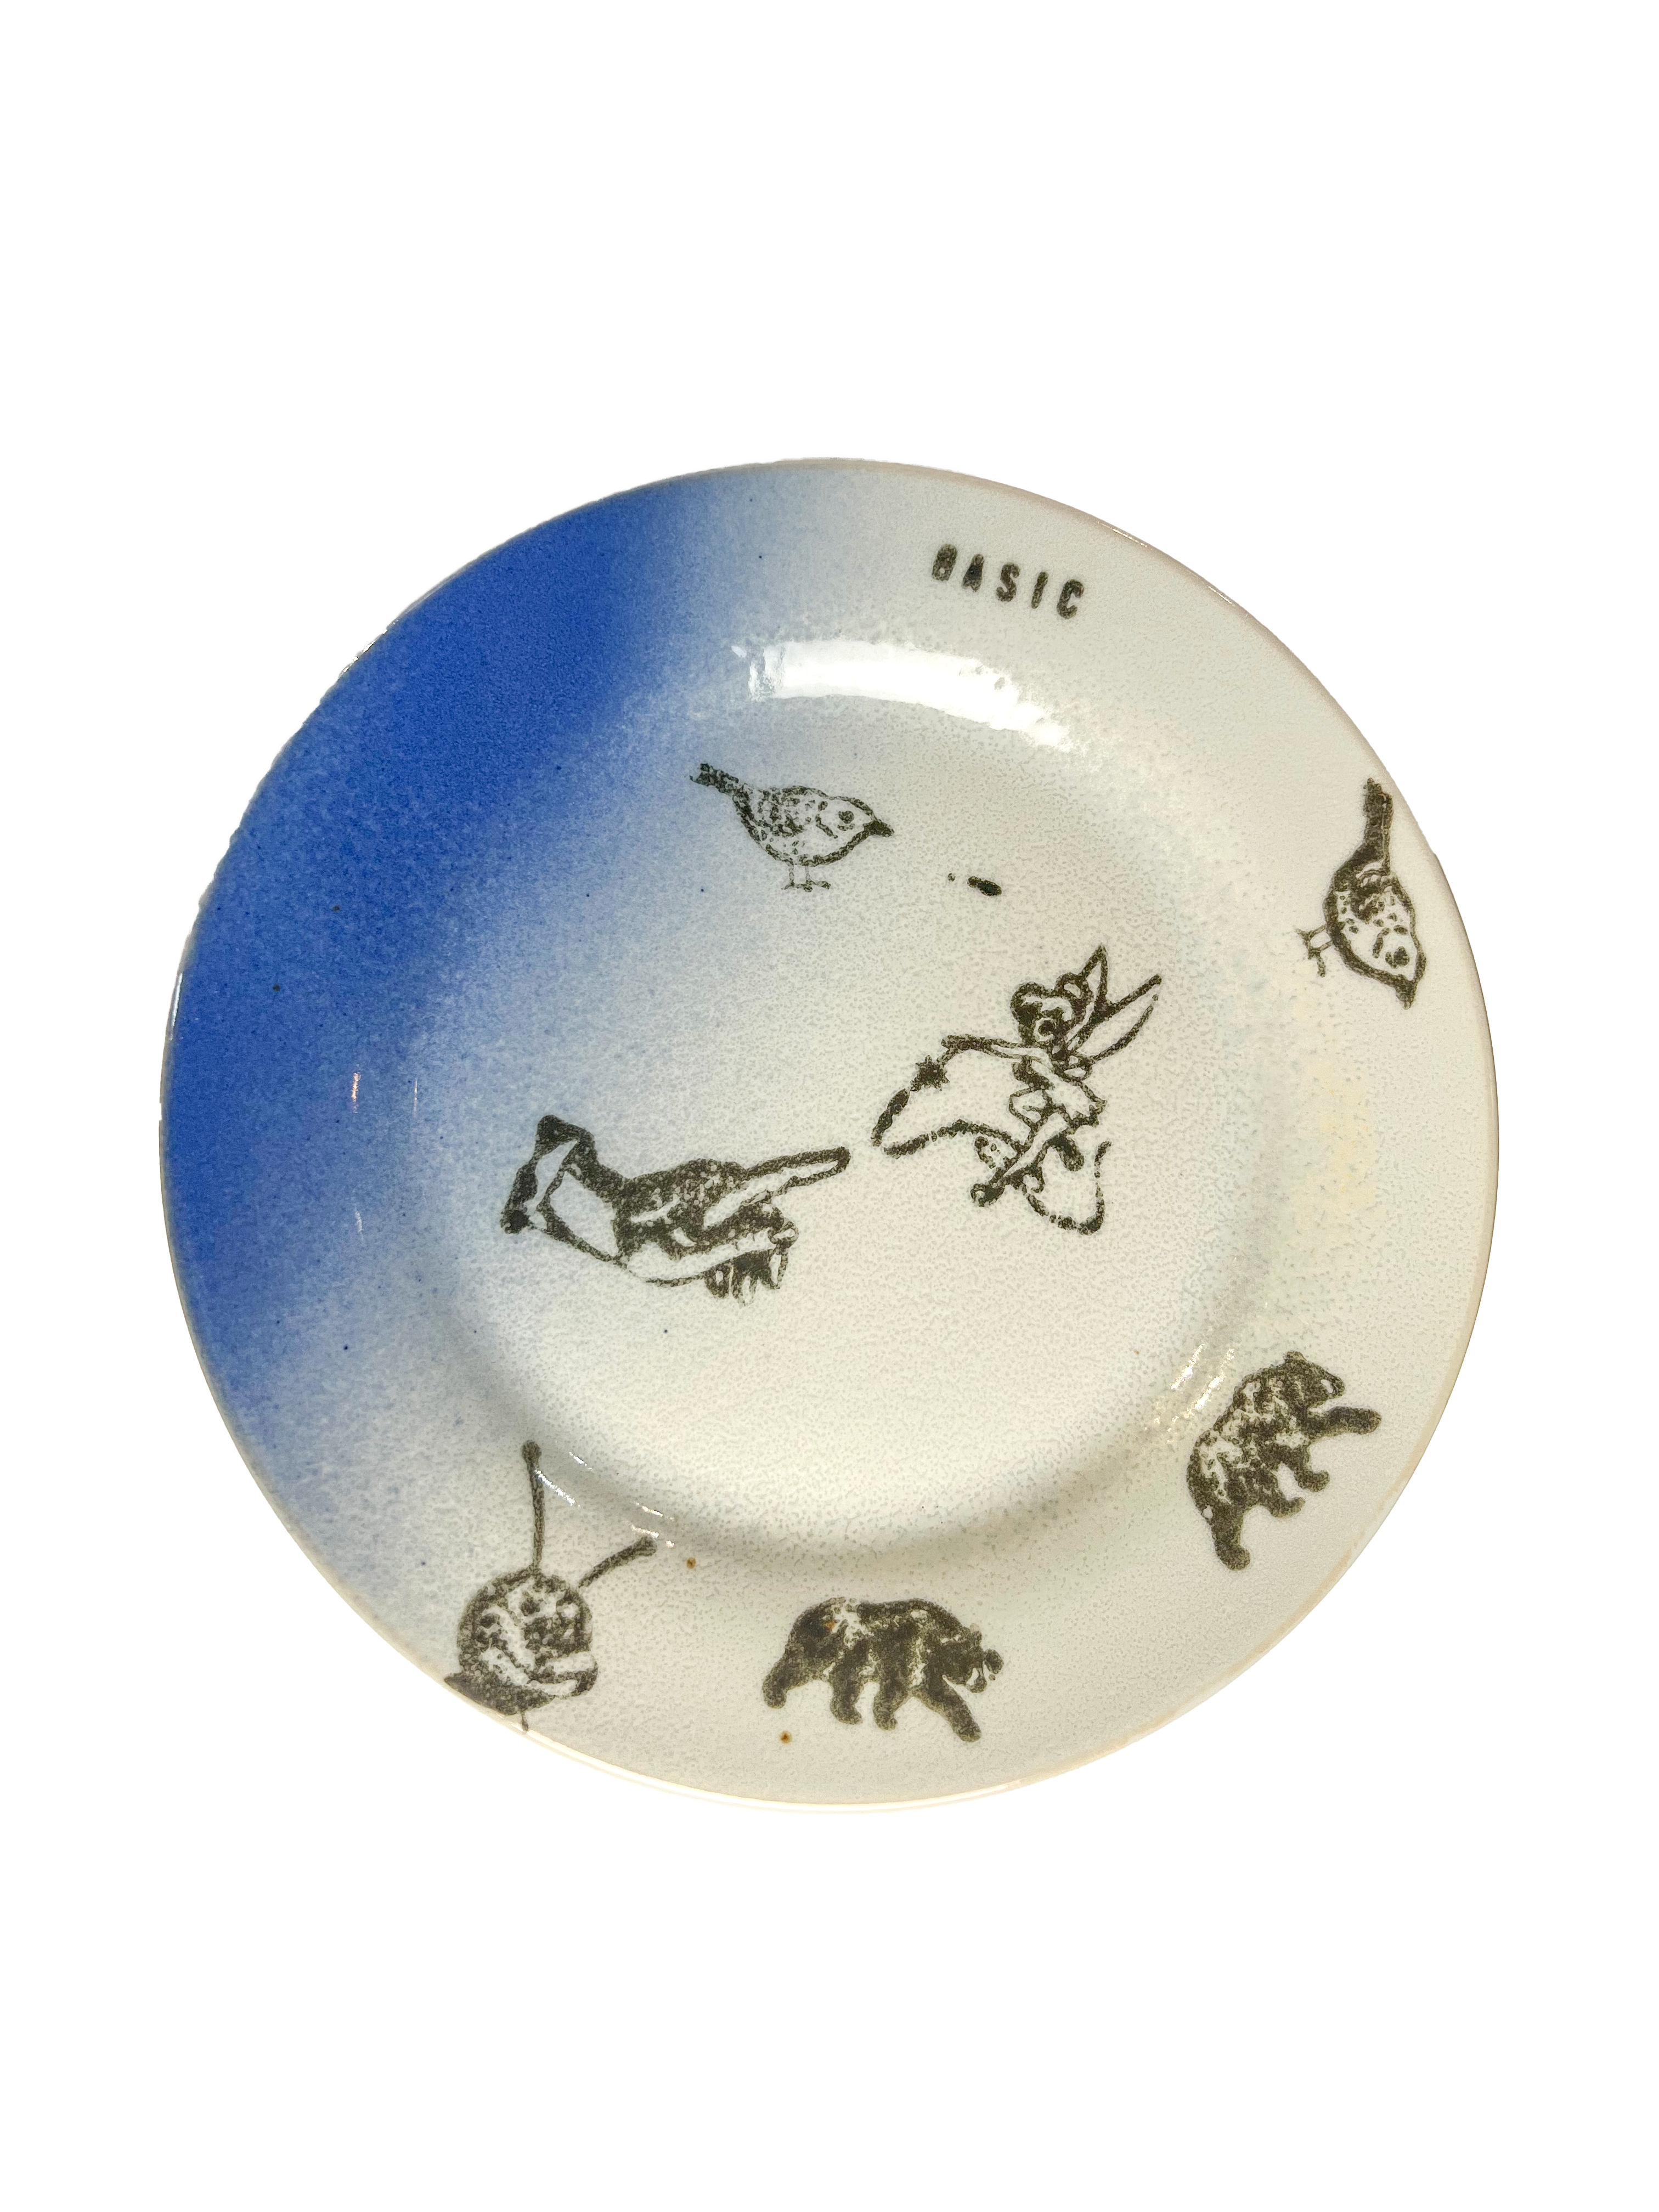 Casey O'Connor, One of One Ceramic Plates